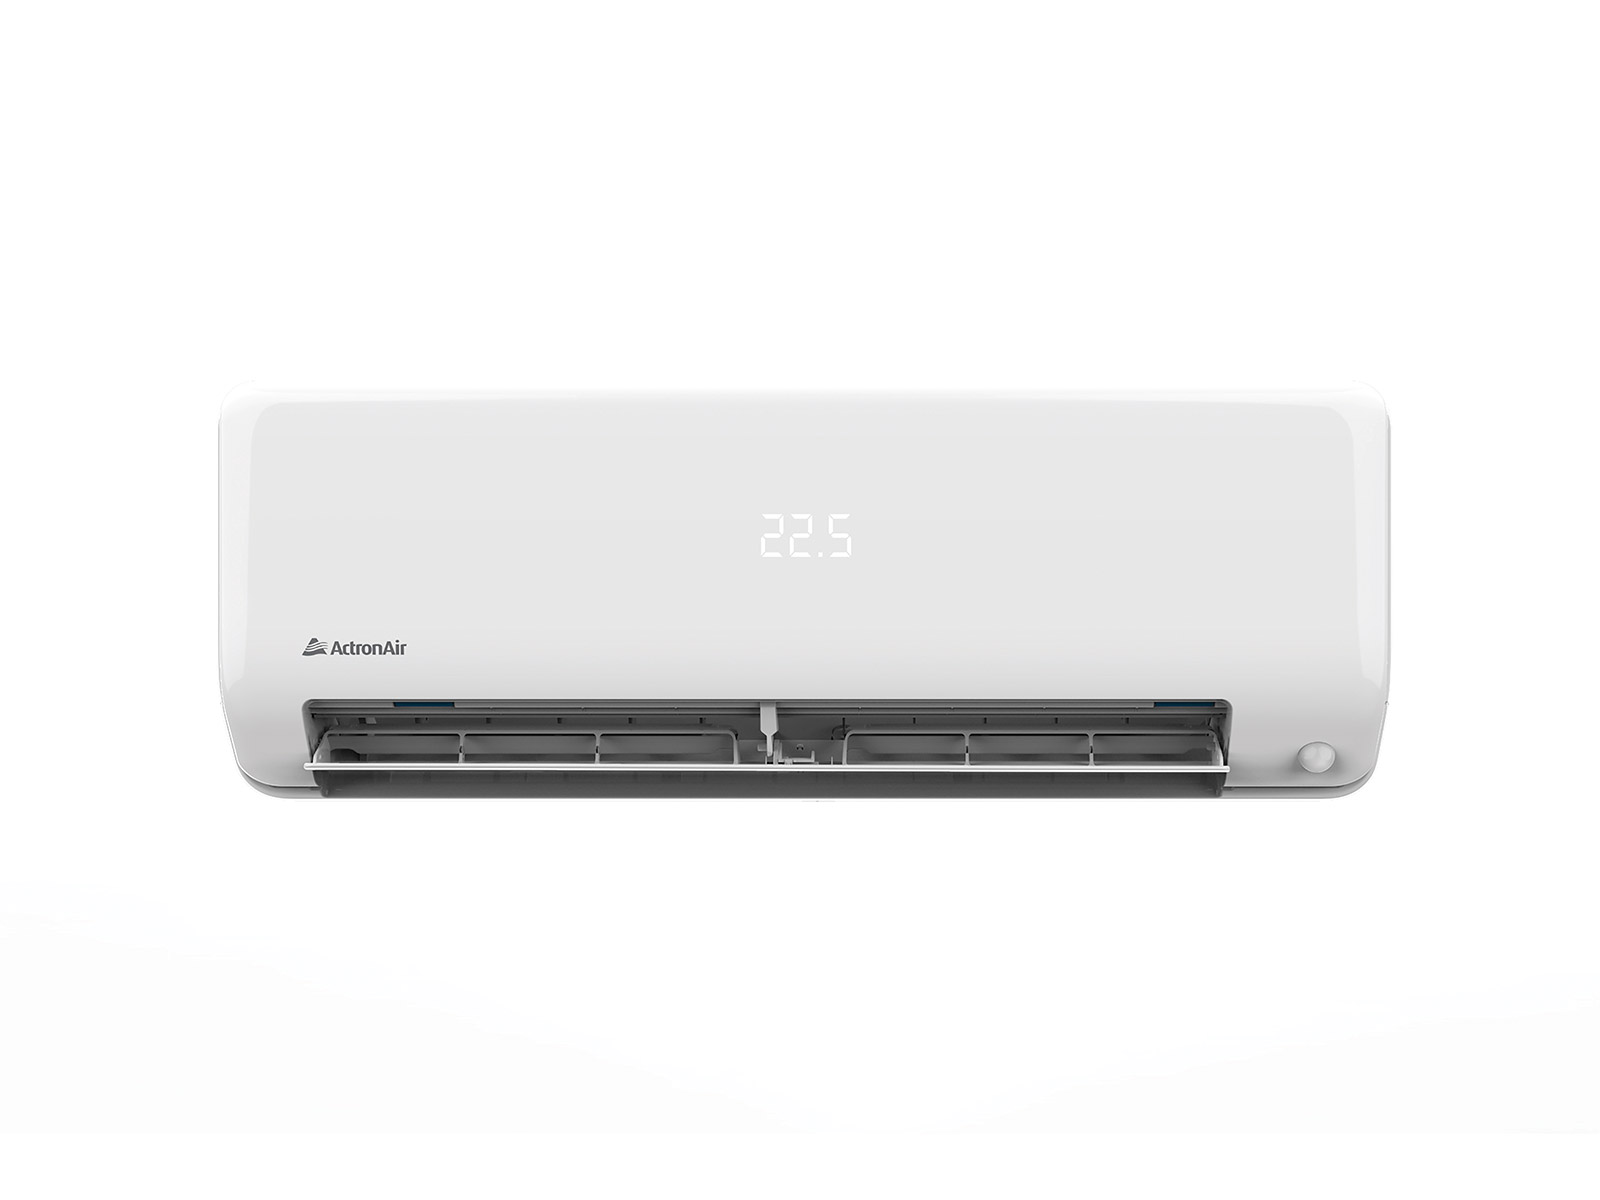 Affordable and Efficient Split System Air Conditioners for Single Rooms and Small Areas